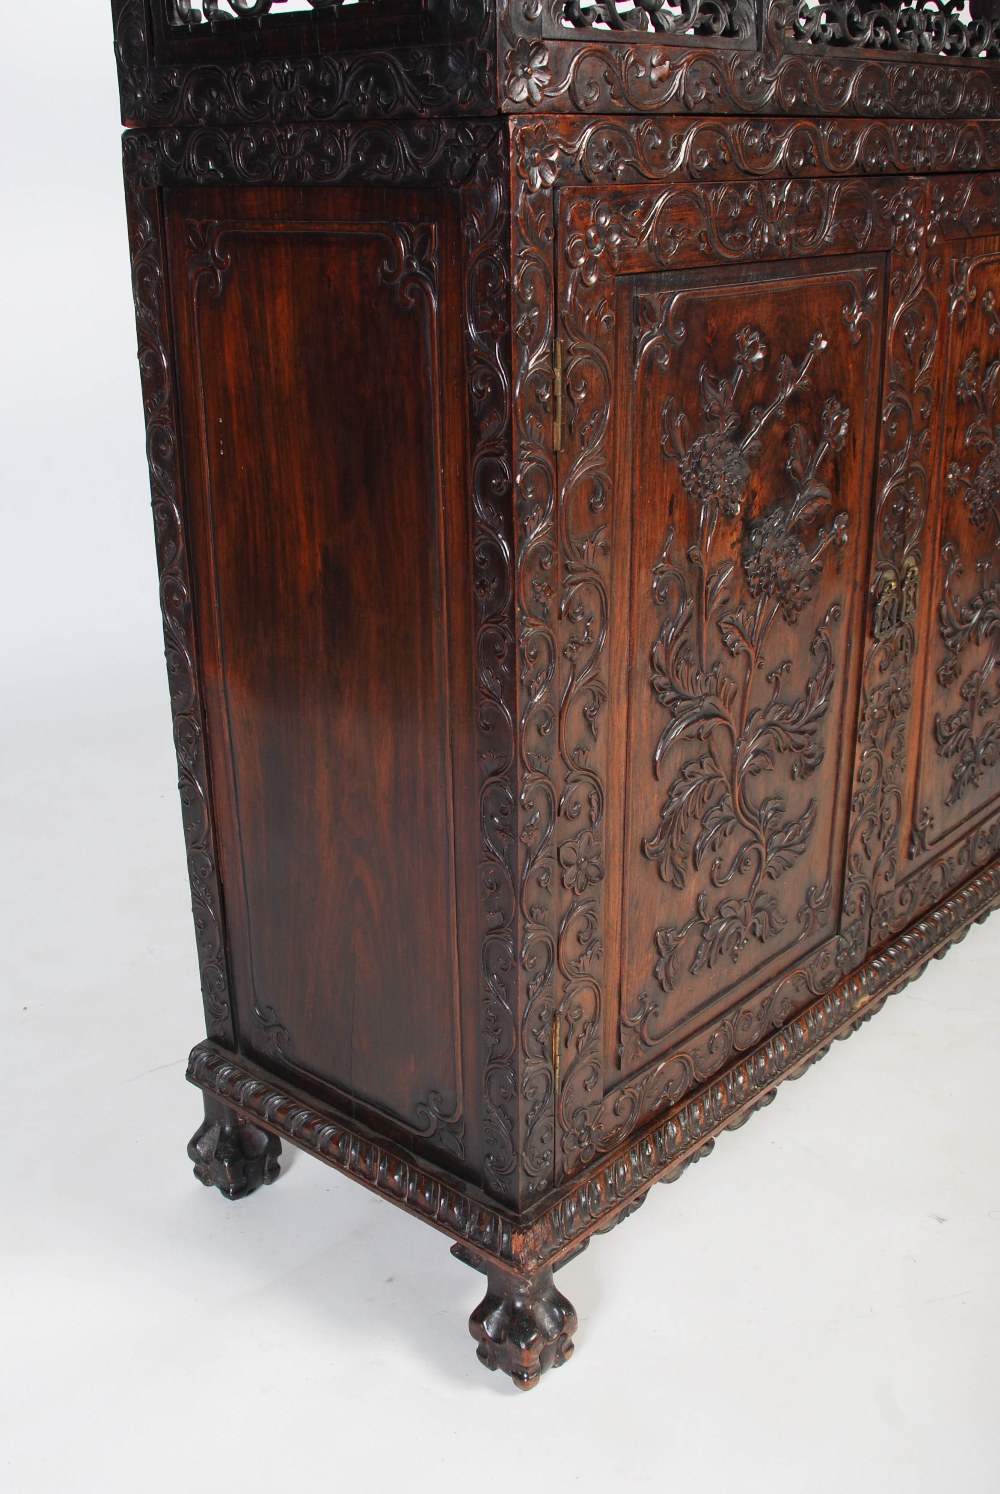 A Chinese carved darkwood display cabinet, Qing Dynasty, the arched top with a carved pediment - Image 3 of 11